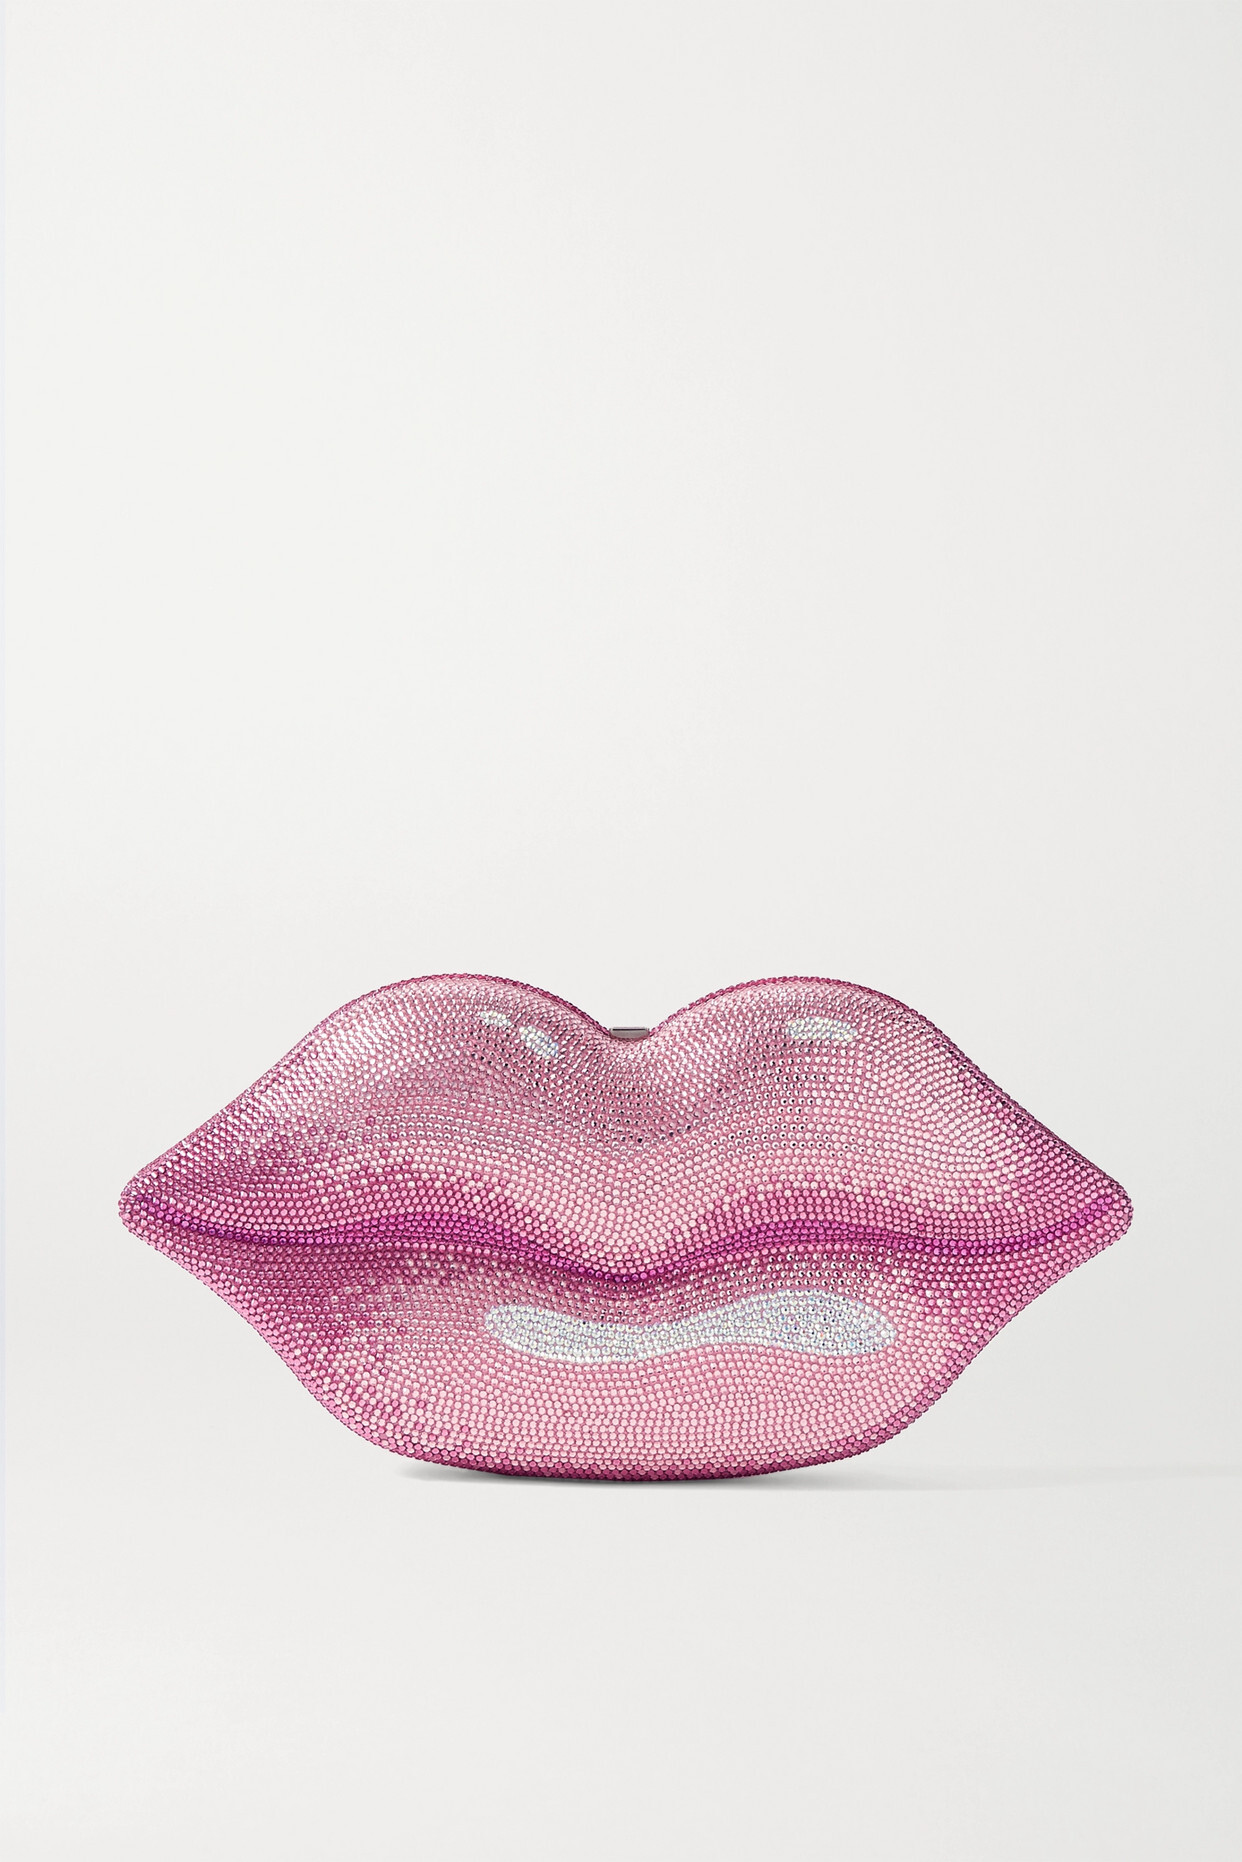 Judith Leiber Couture - Hot Lips Crystal-embellished Silver-tone Clutch - Pink